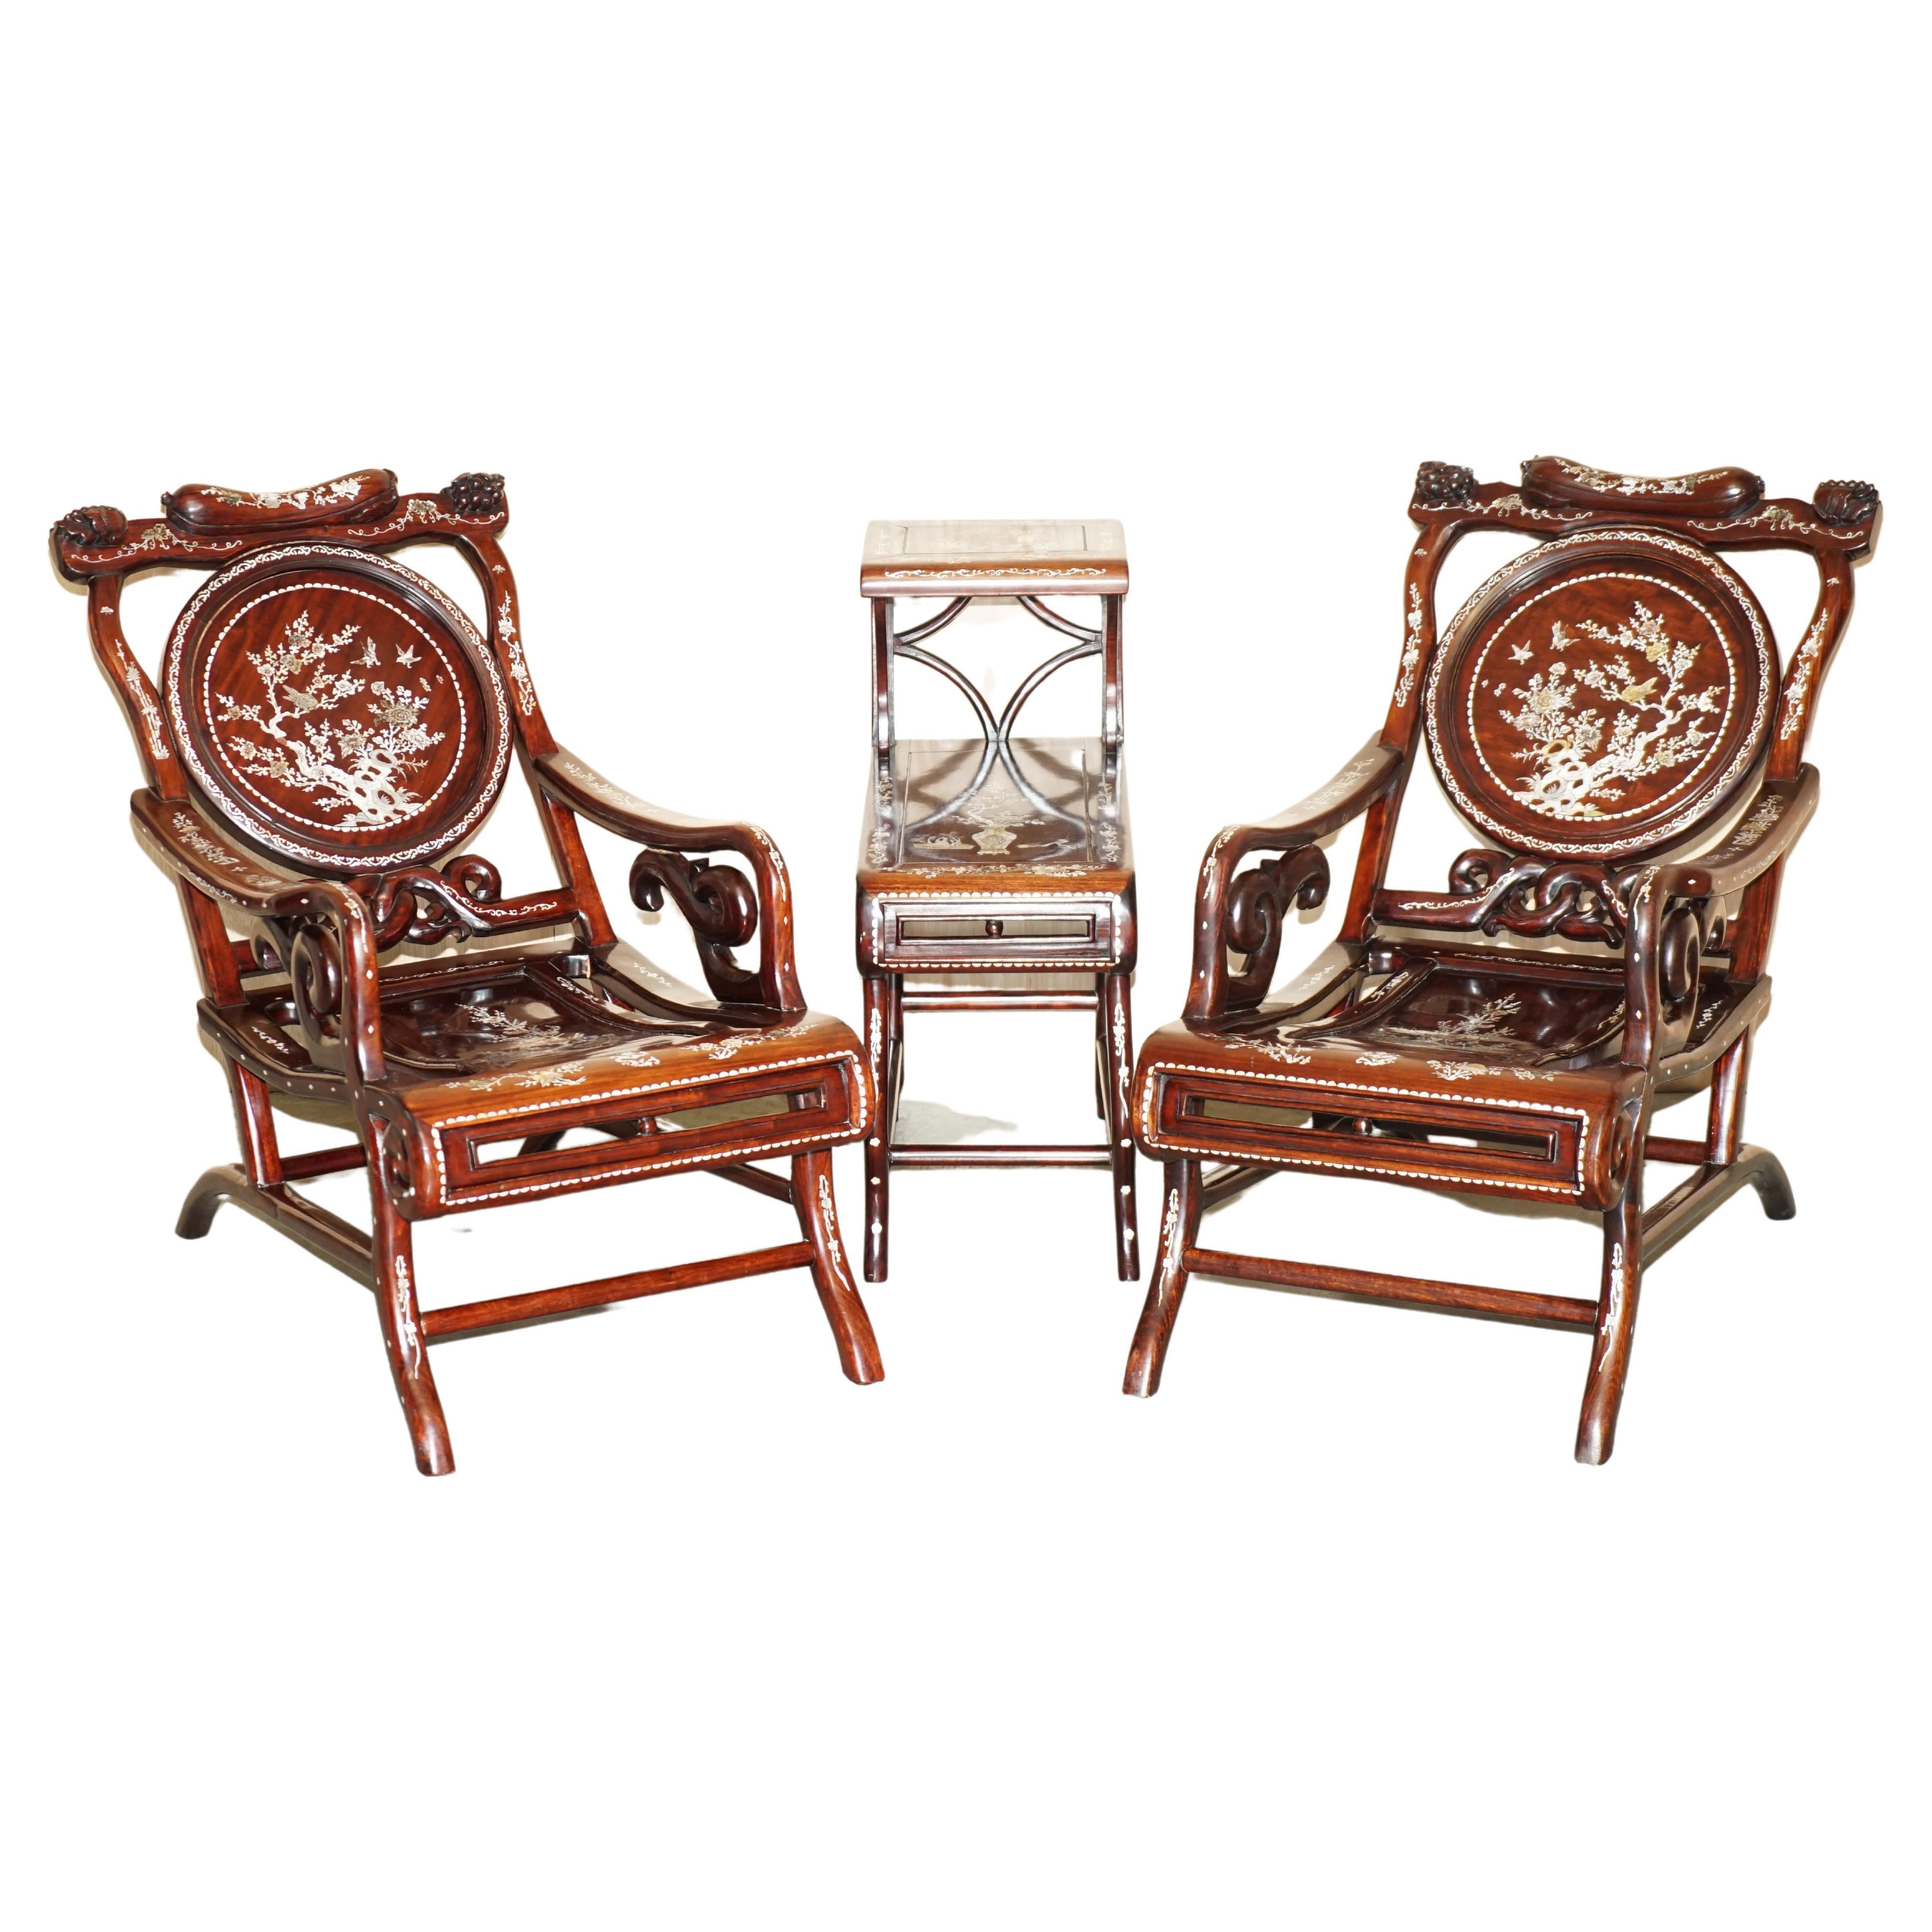 PAAR ANTIQUE PADAUK & MOTHER OF PEARL RECLiNED PLANTATION ARMCHAIRS & TABLE